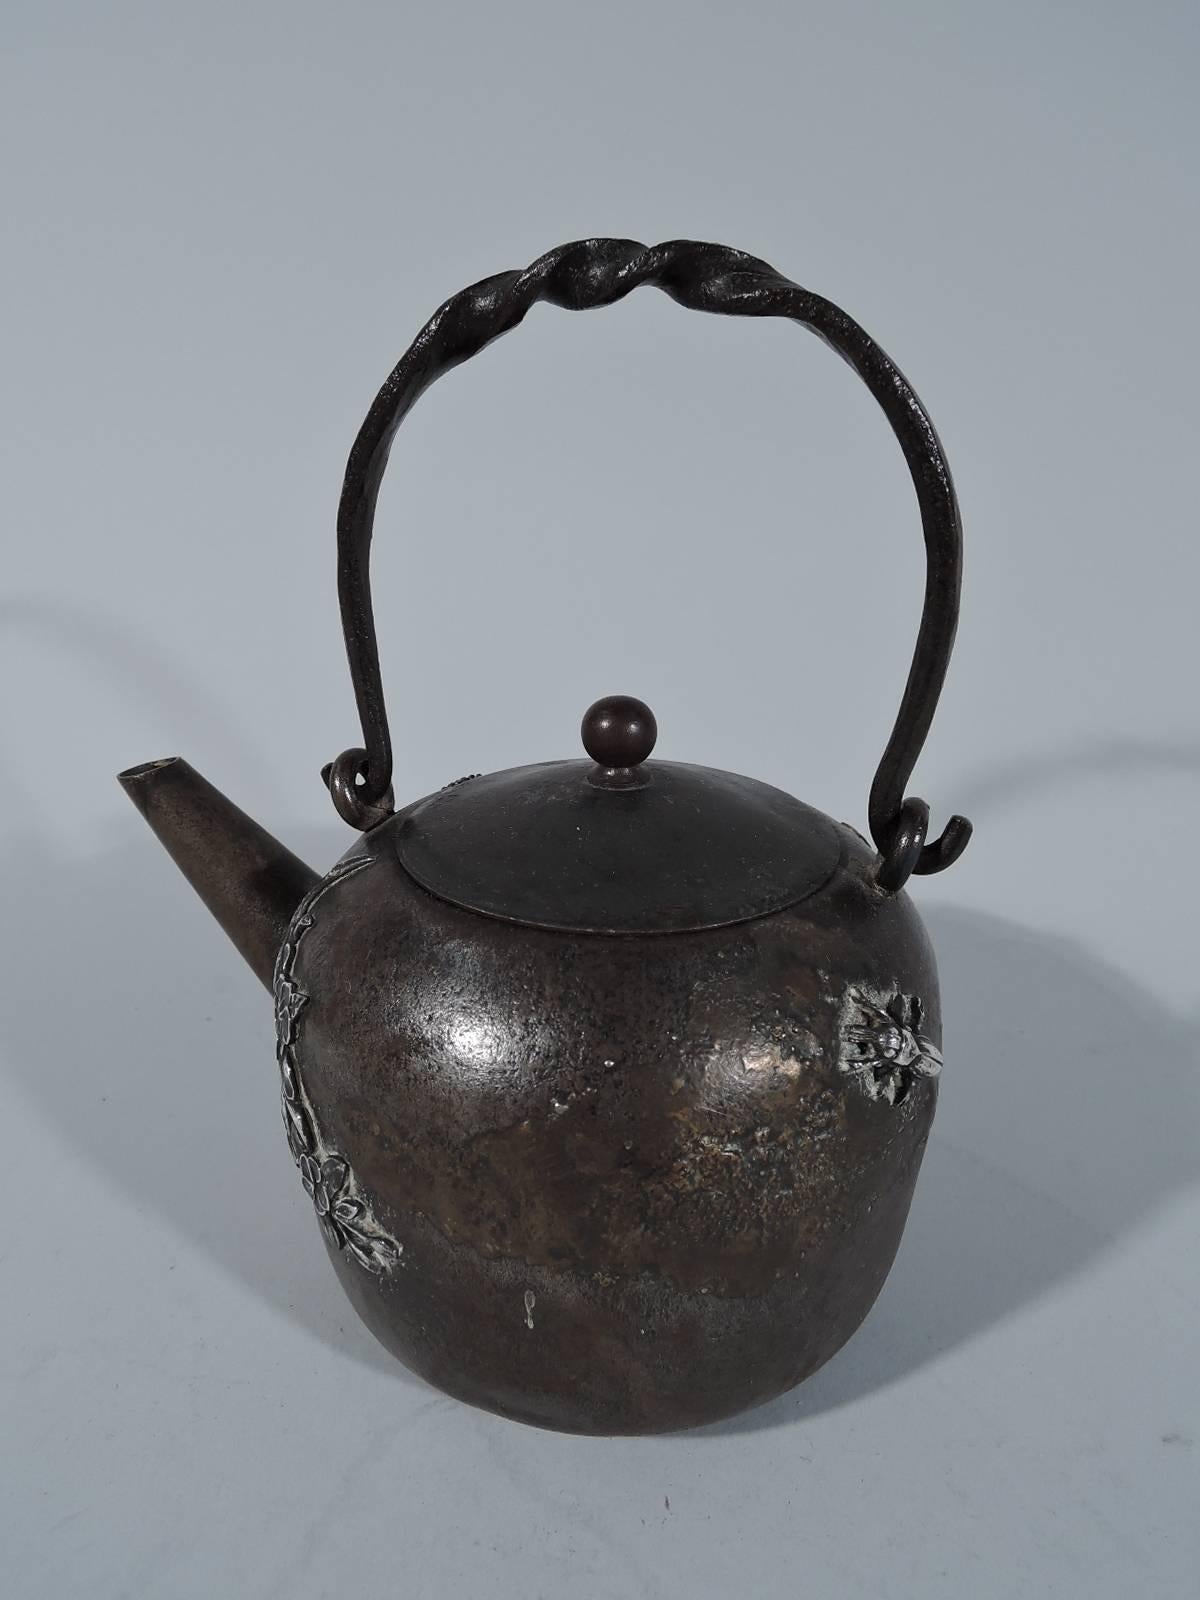 Japonesque iron teapot with sterling silver mounts. Made by Gorham in Providence in 1883. A rare experimental piece. Japanese form with cover and twisted swing handle. Iron surface is granulated with nuanced patina. Mounts are bird, blossoming